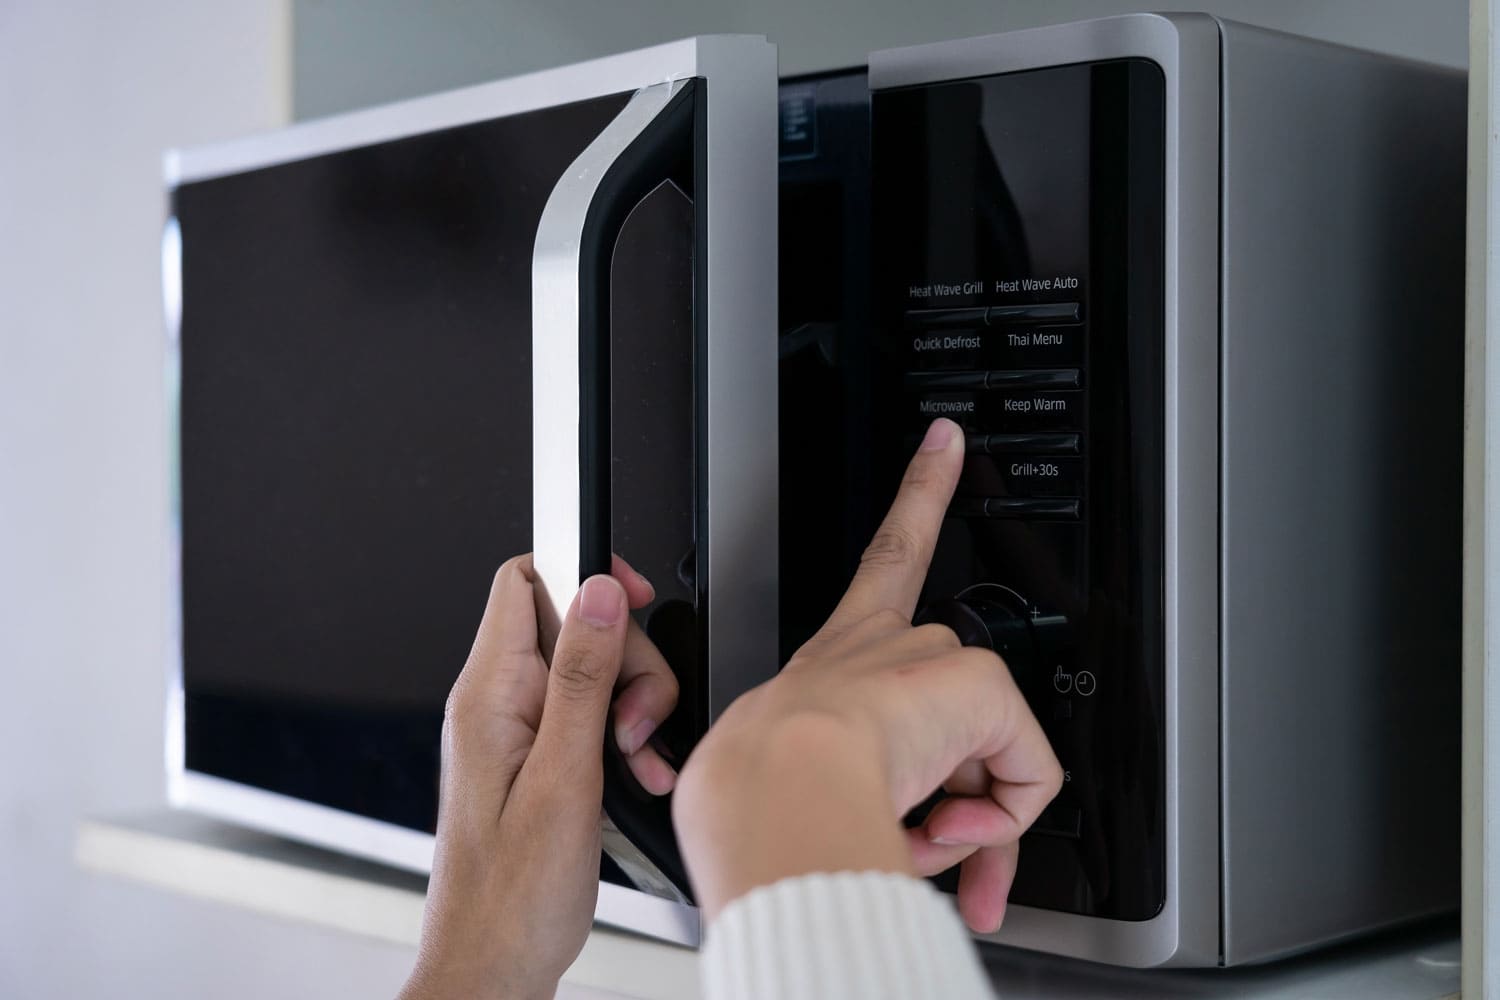 Woman's hand trying to use a Panasonic Microwave even if the clock is not set